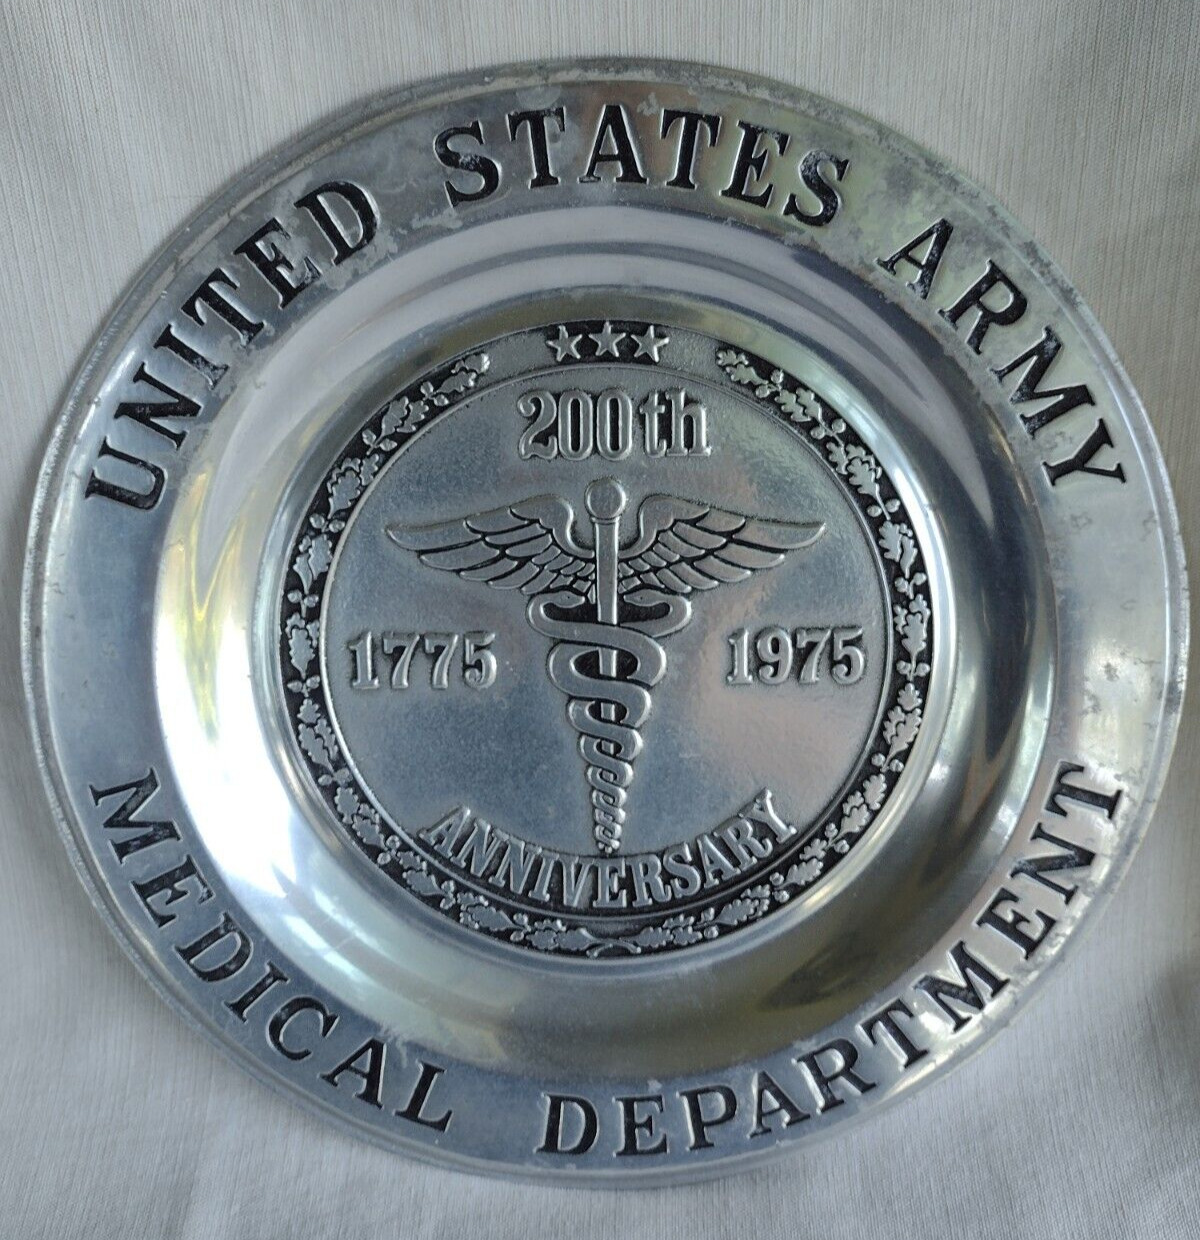 Vintage United States Army Medical Department 200th Anniversary Pewter Plate